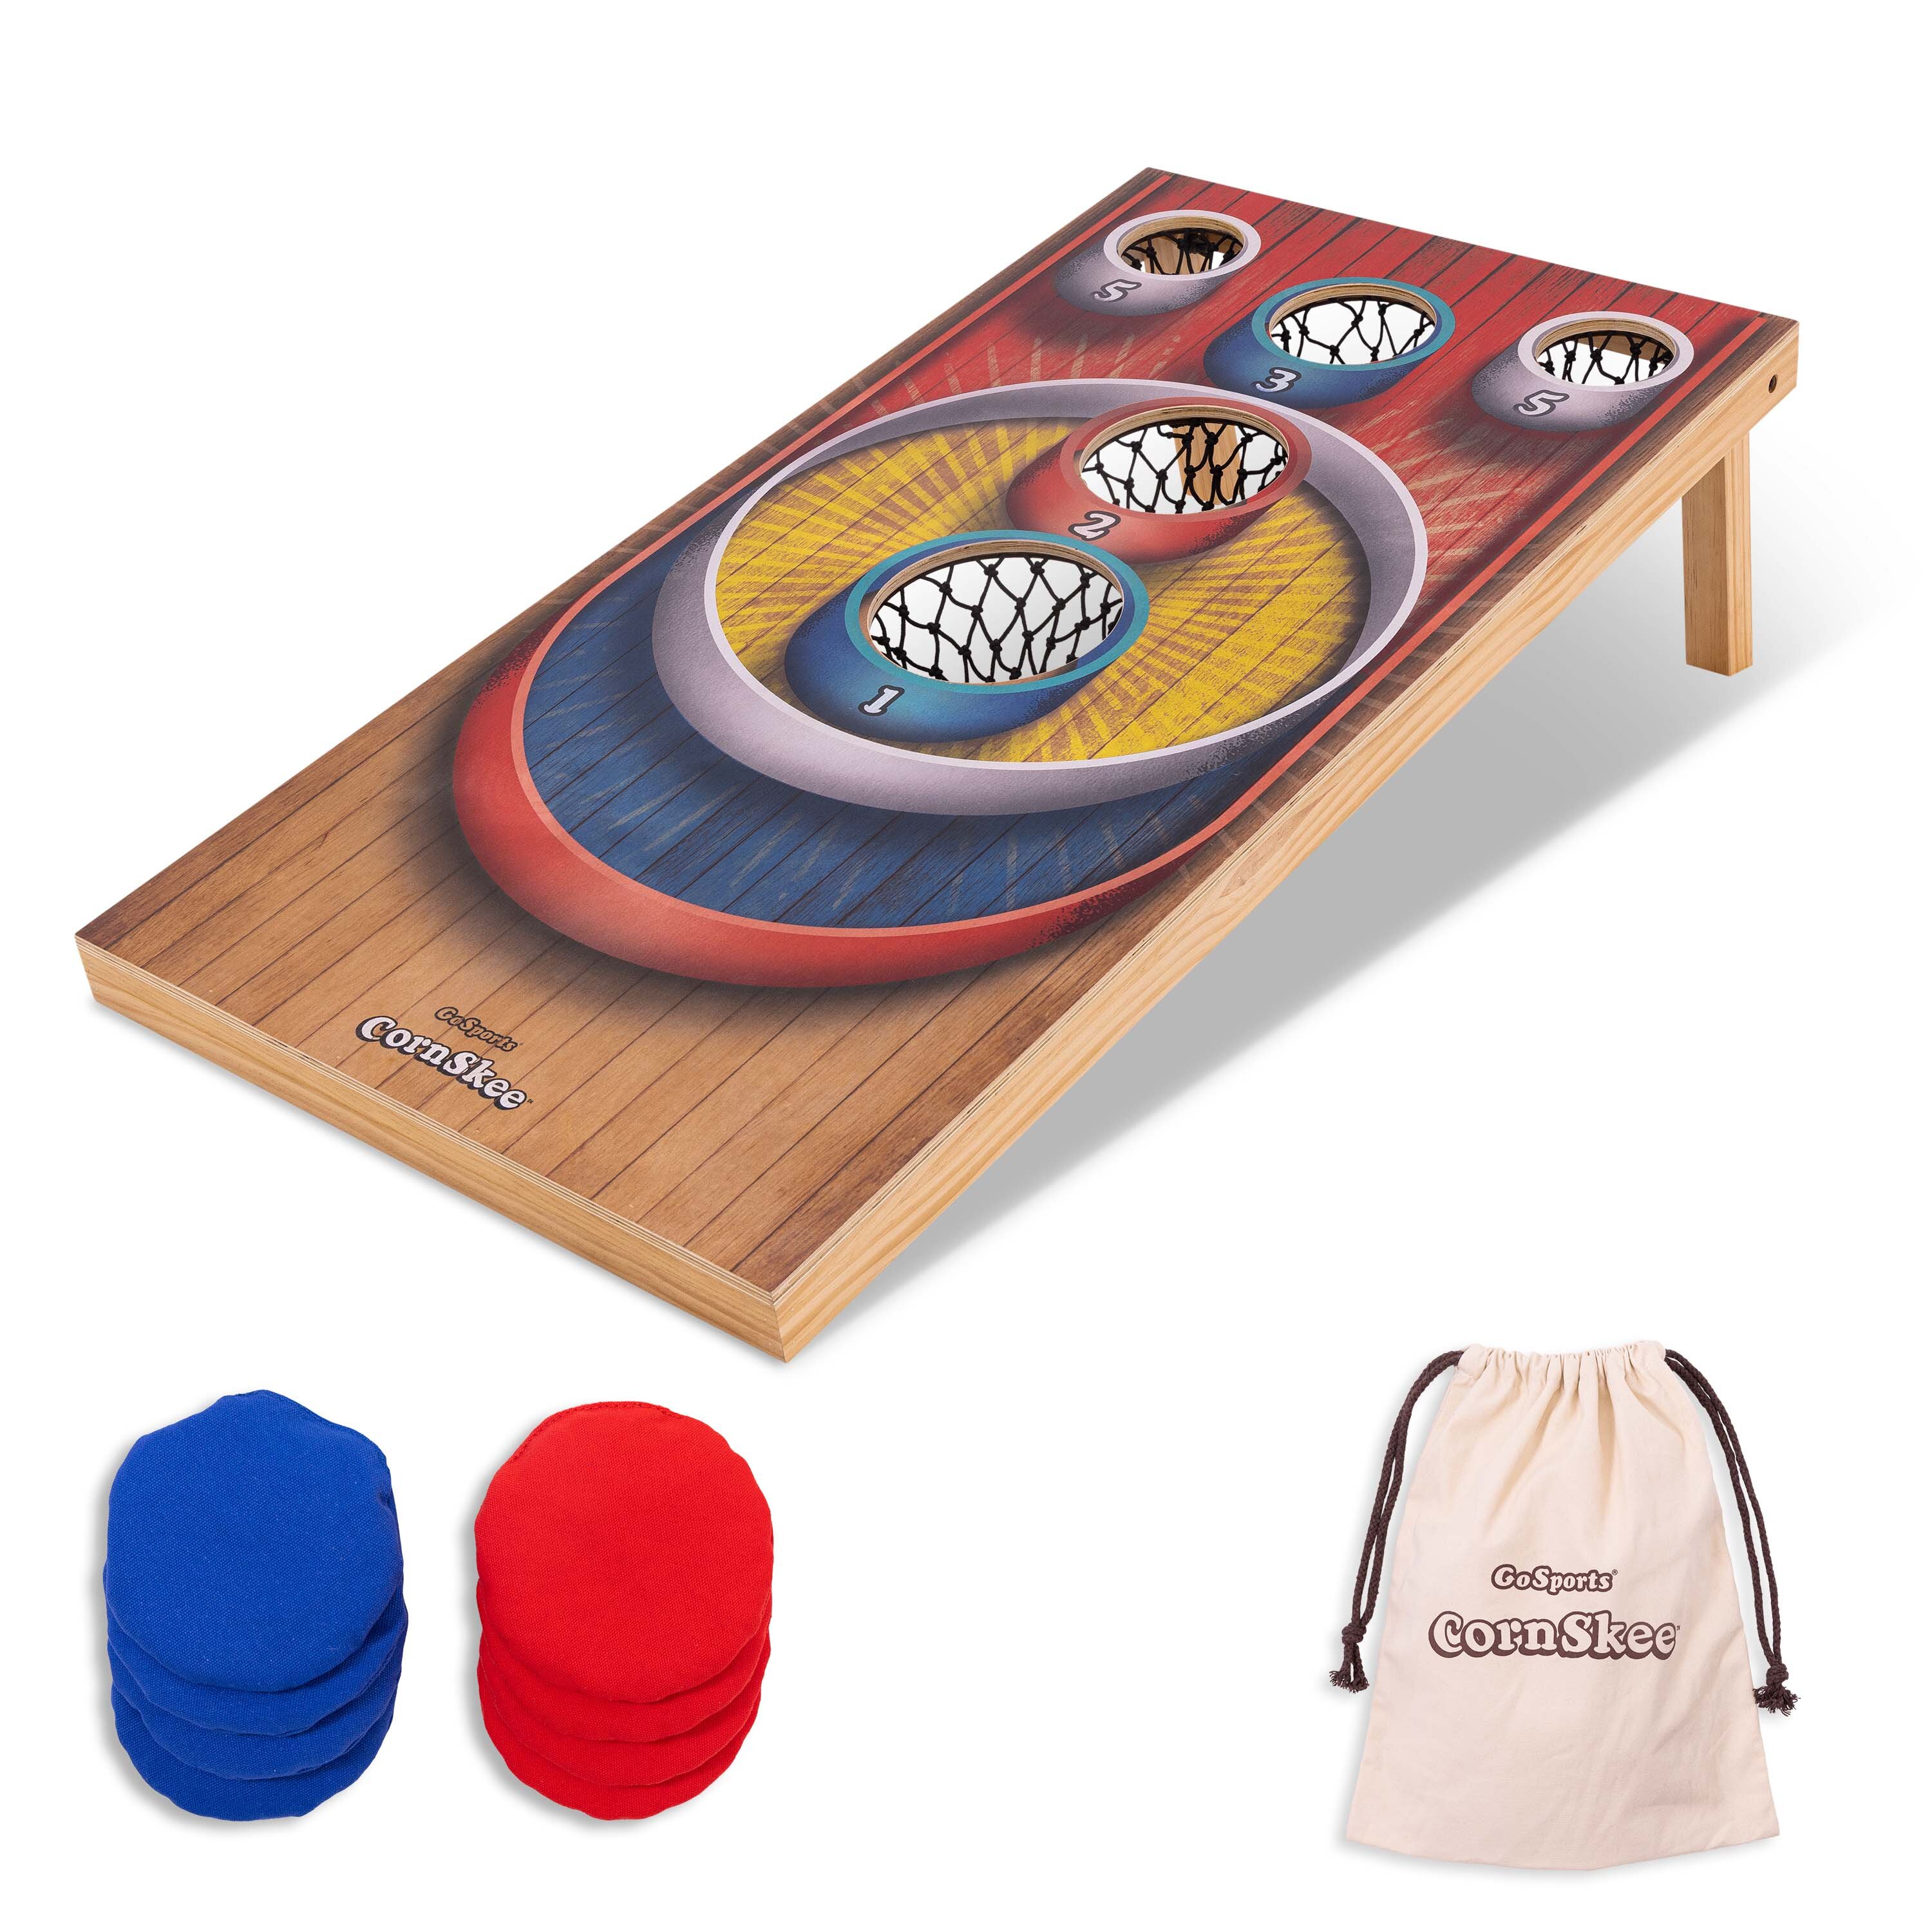 Youth Size GoSports Junior Size Cornhole Bean Bag Toss Game Indoor Outdoor 